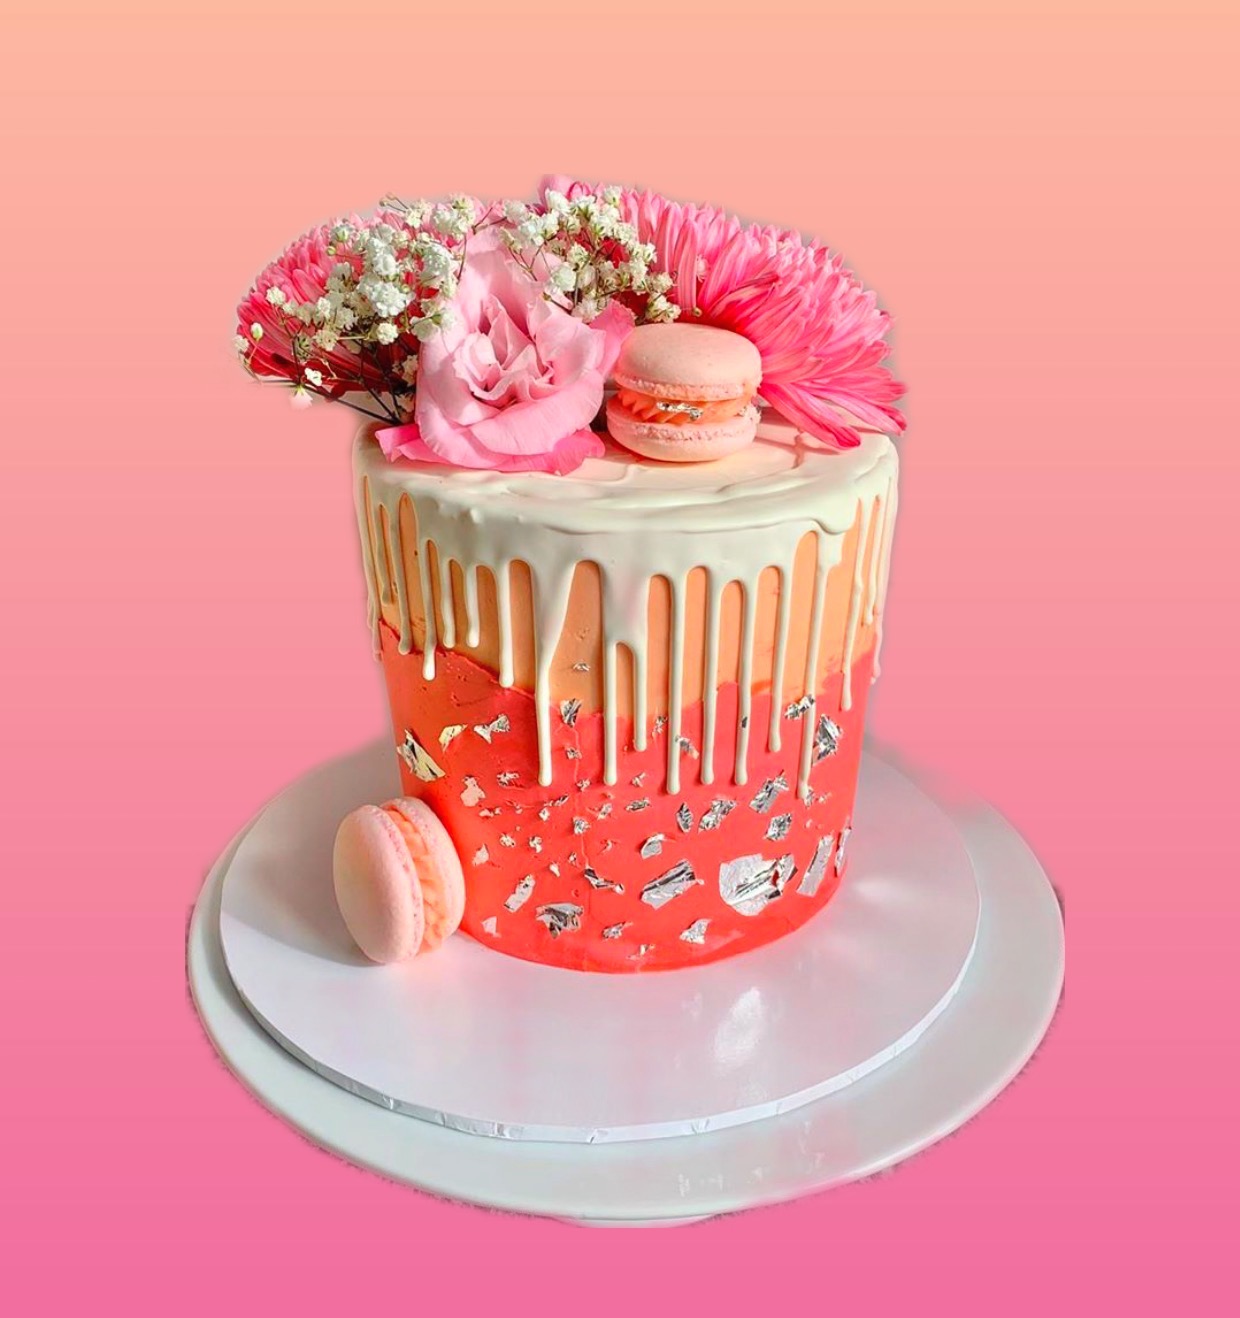 Win a stunning cake from Megs Makes to deliver to a loved one !